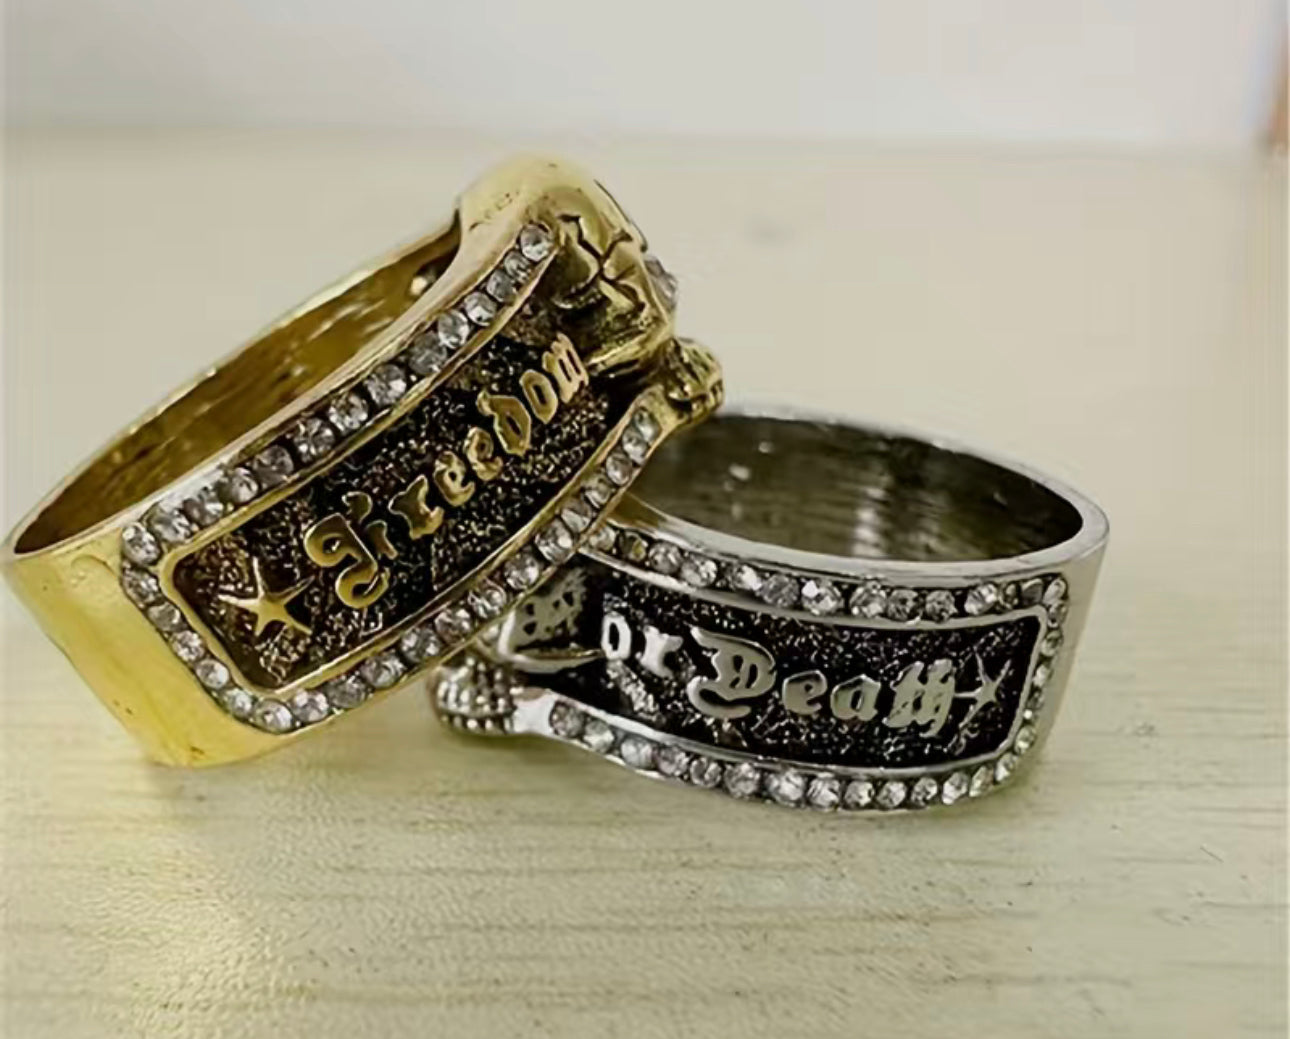 Freedom or Death Ring with Skull